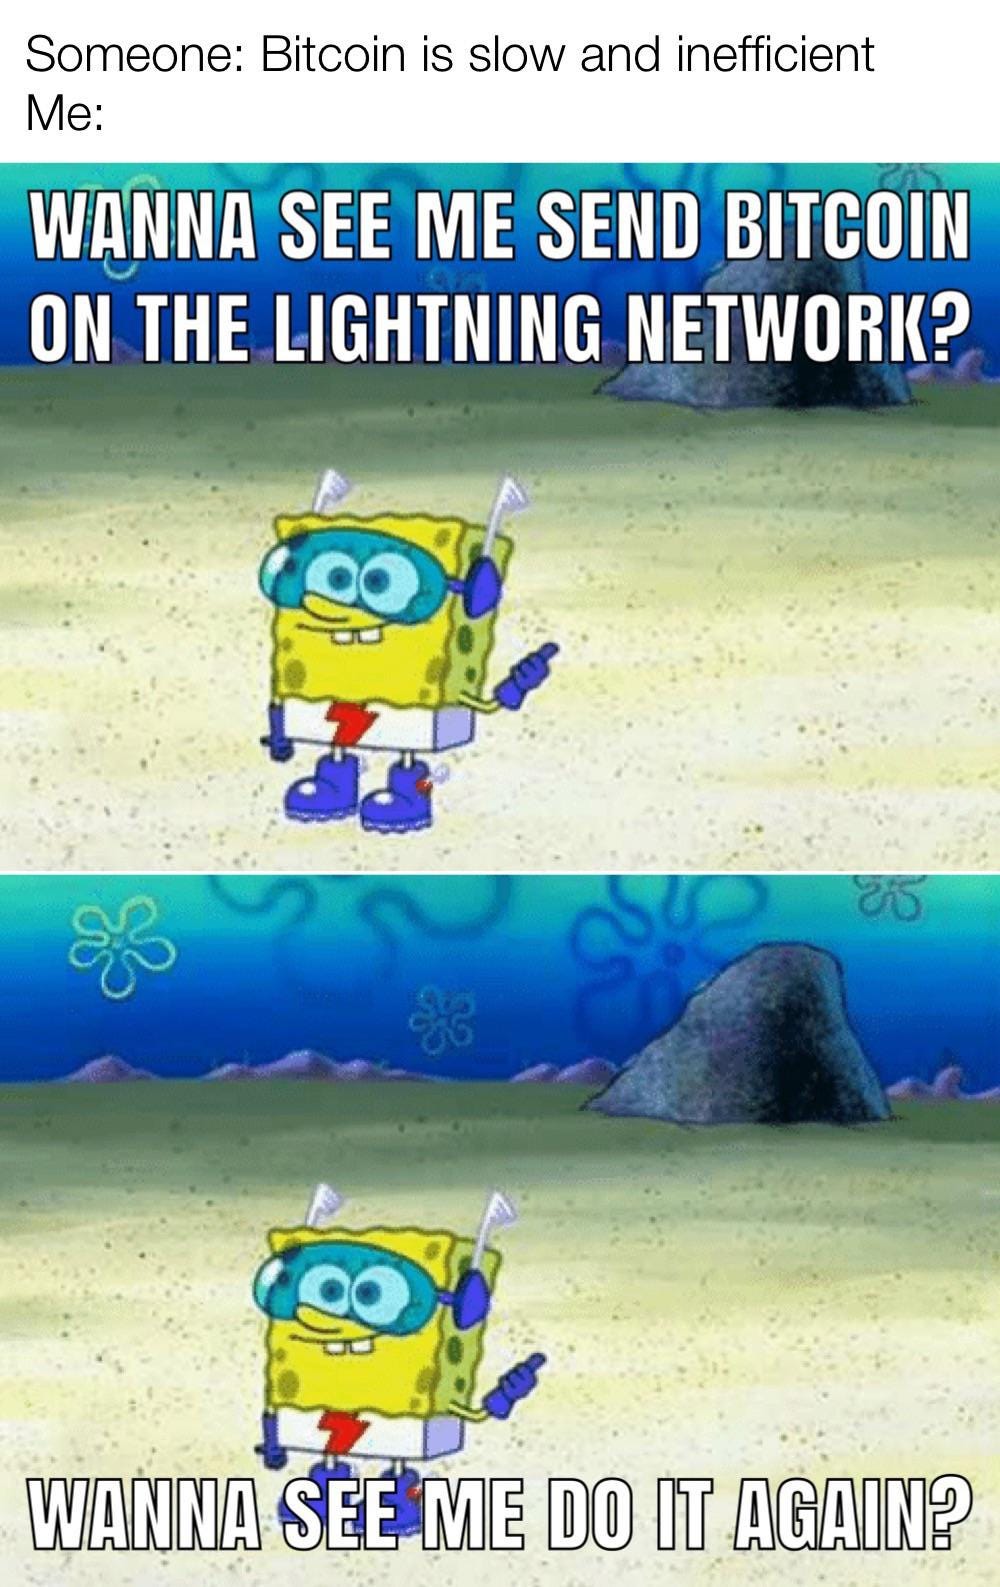 Literally fast as Lightning - Posting a LN meme a day for 141 days  straight: #11 : r/TheLightningNetwork